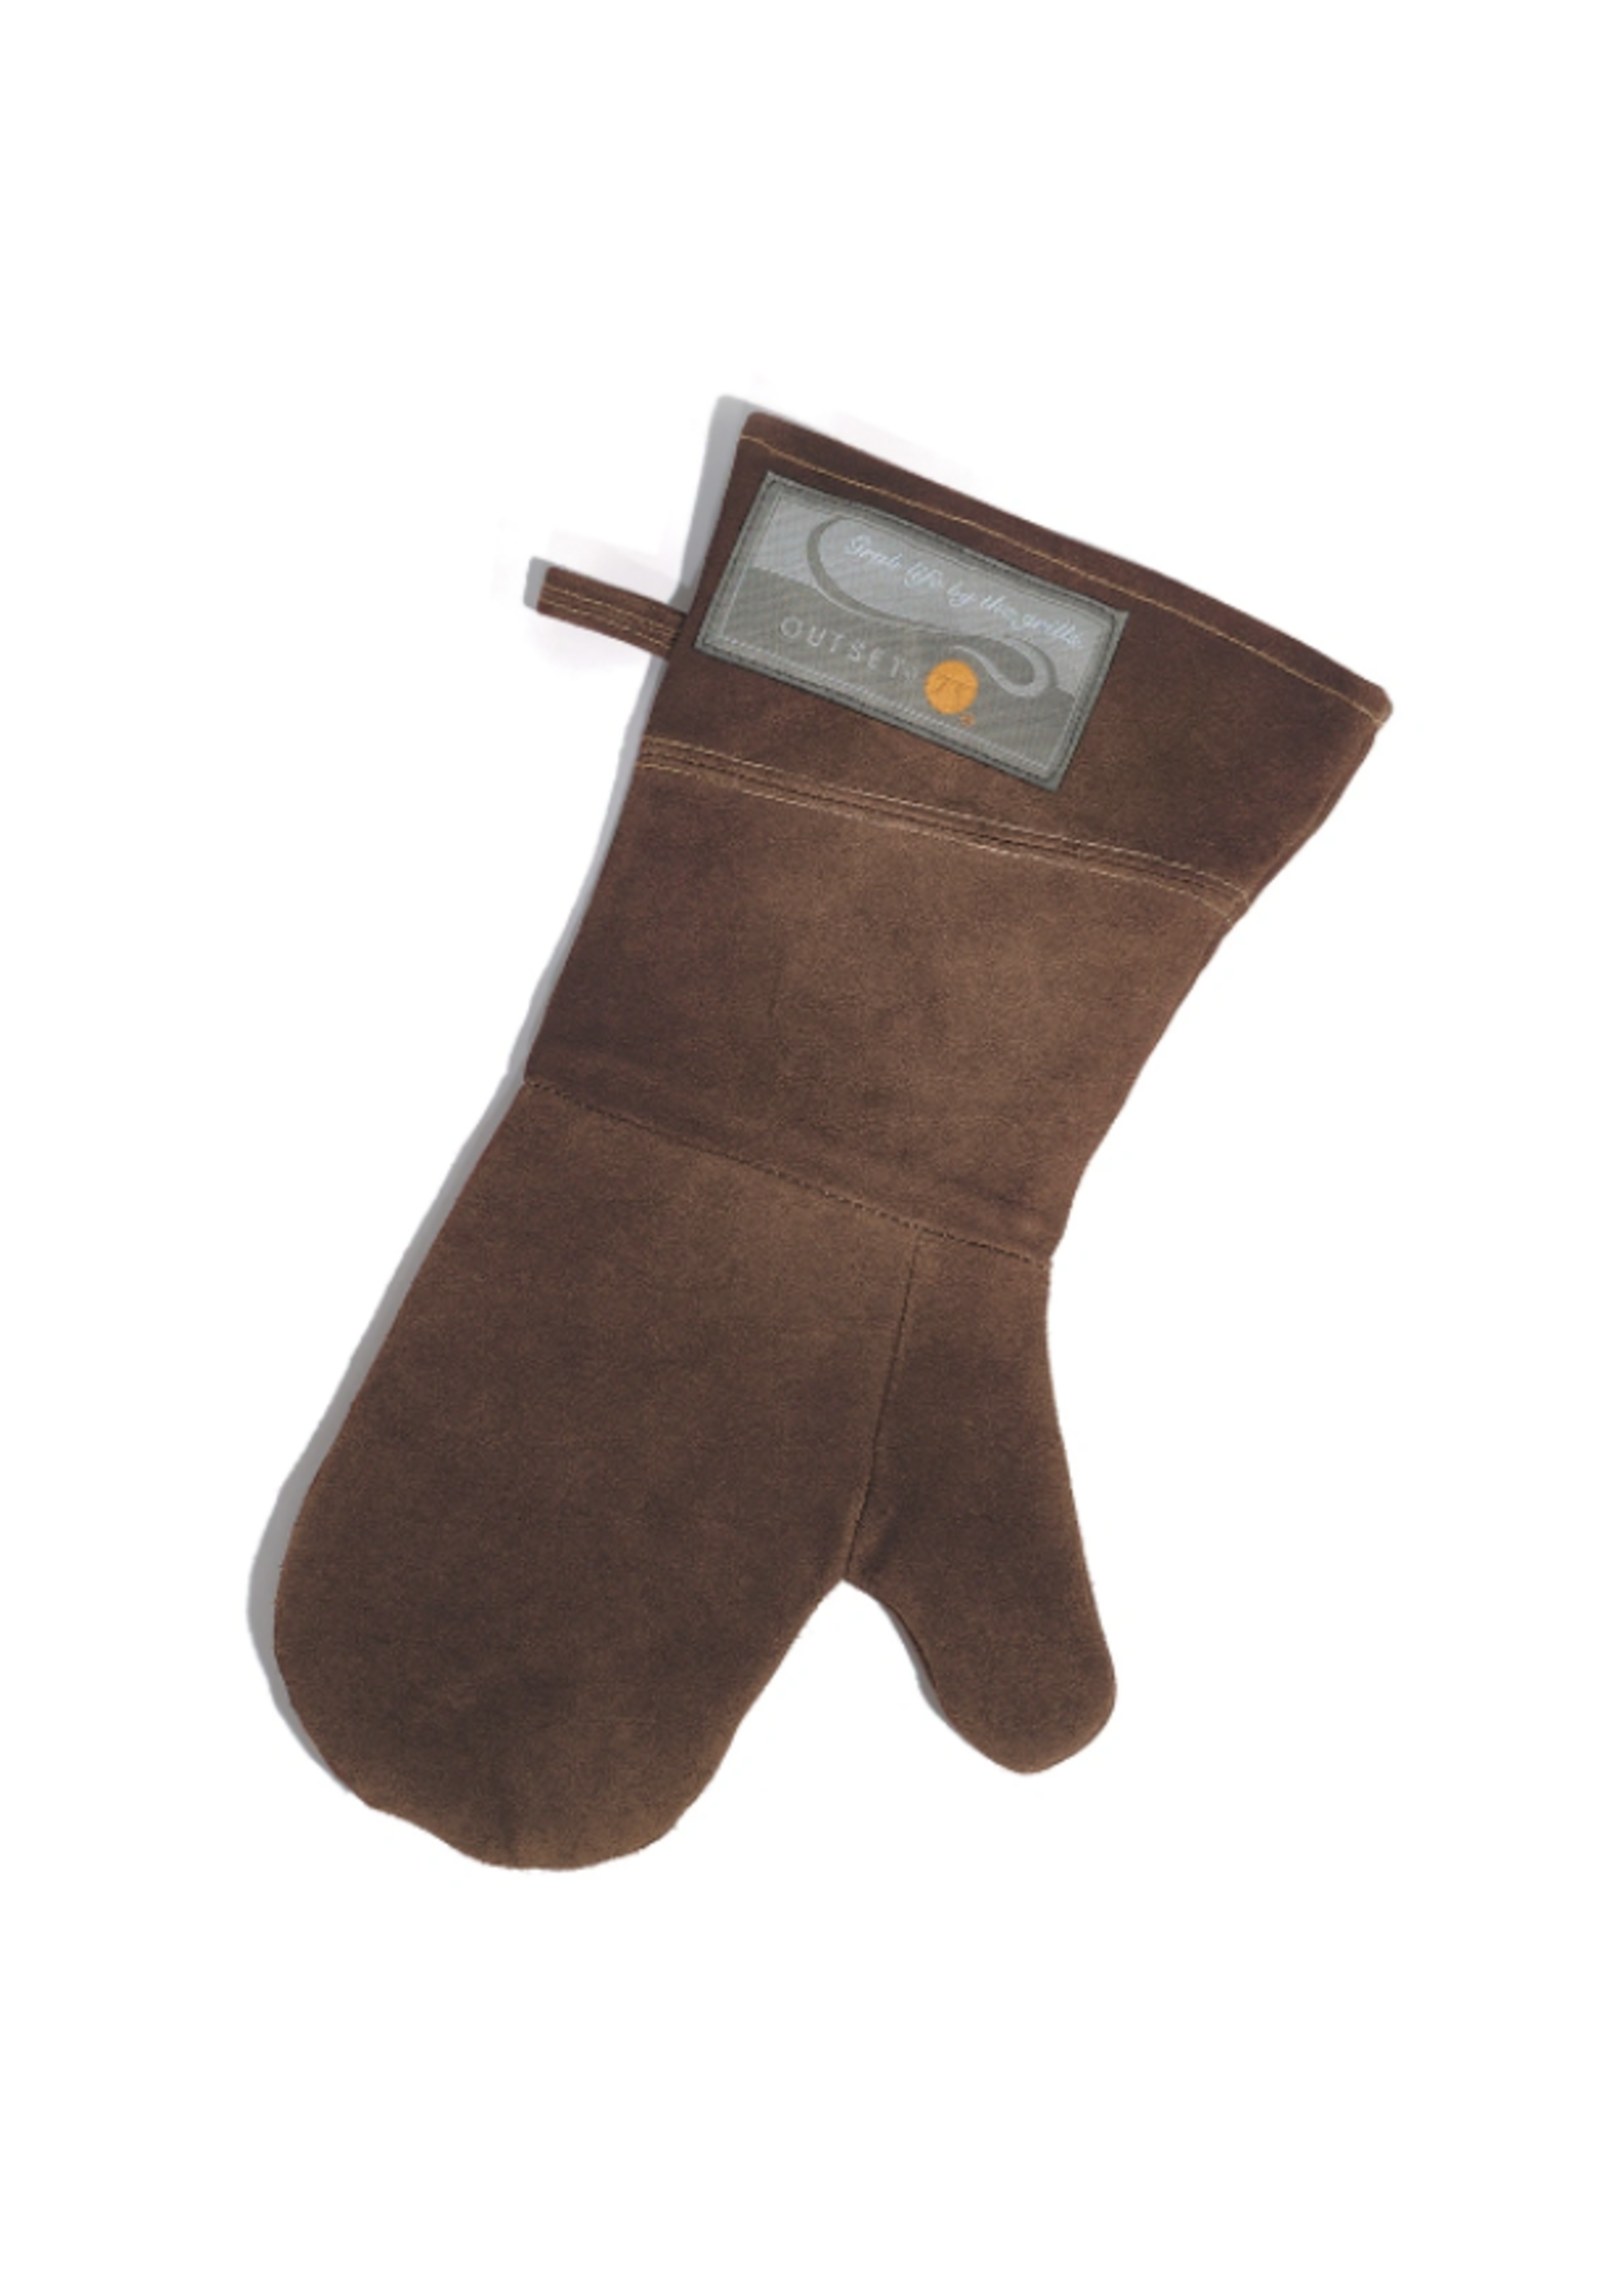 Outset Brown Leather Grill Mitt 15"